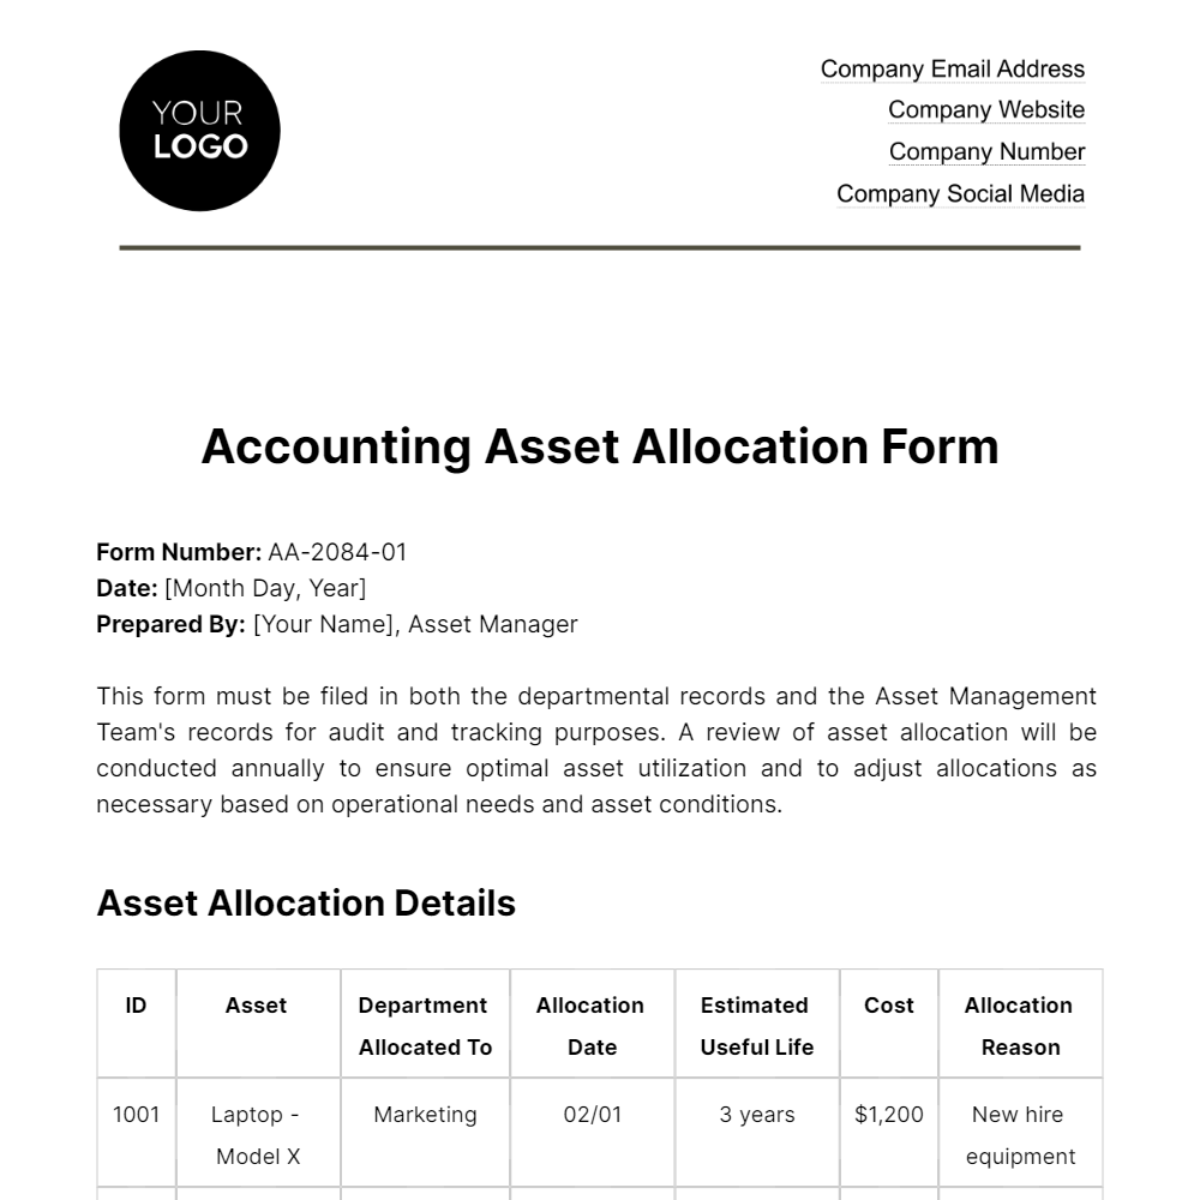 Accounting Asset Allocation Form Template